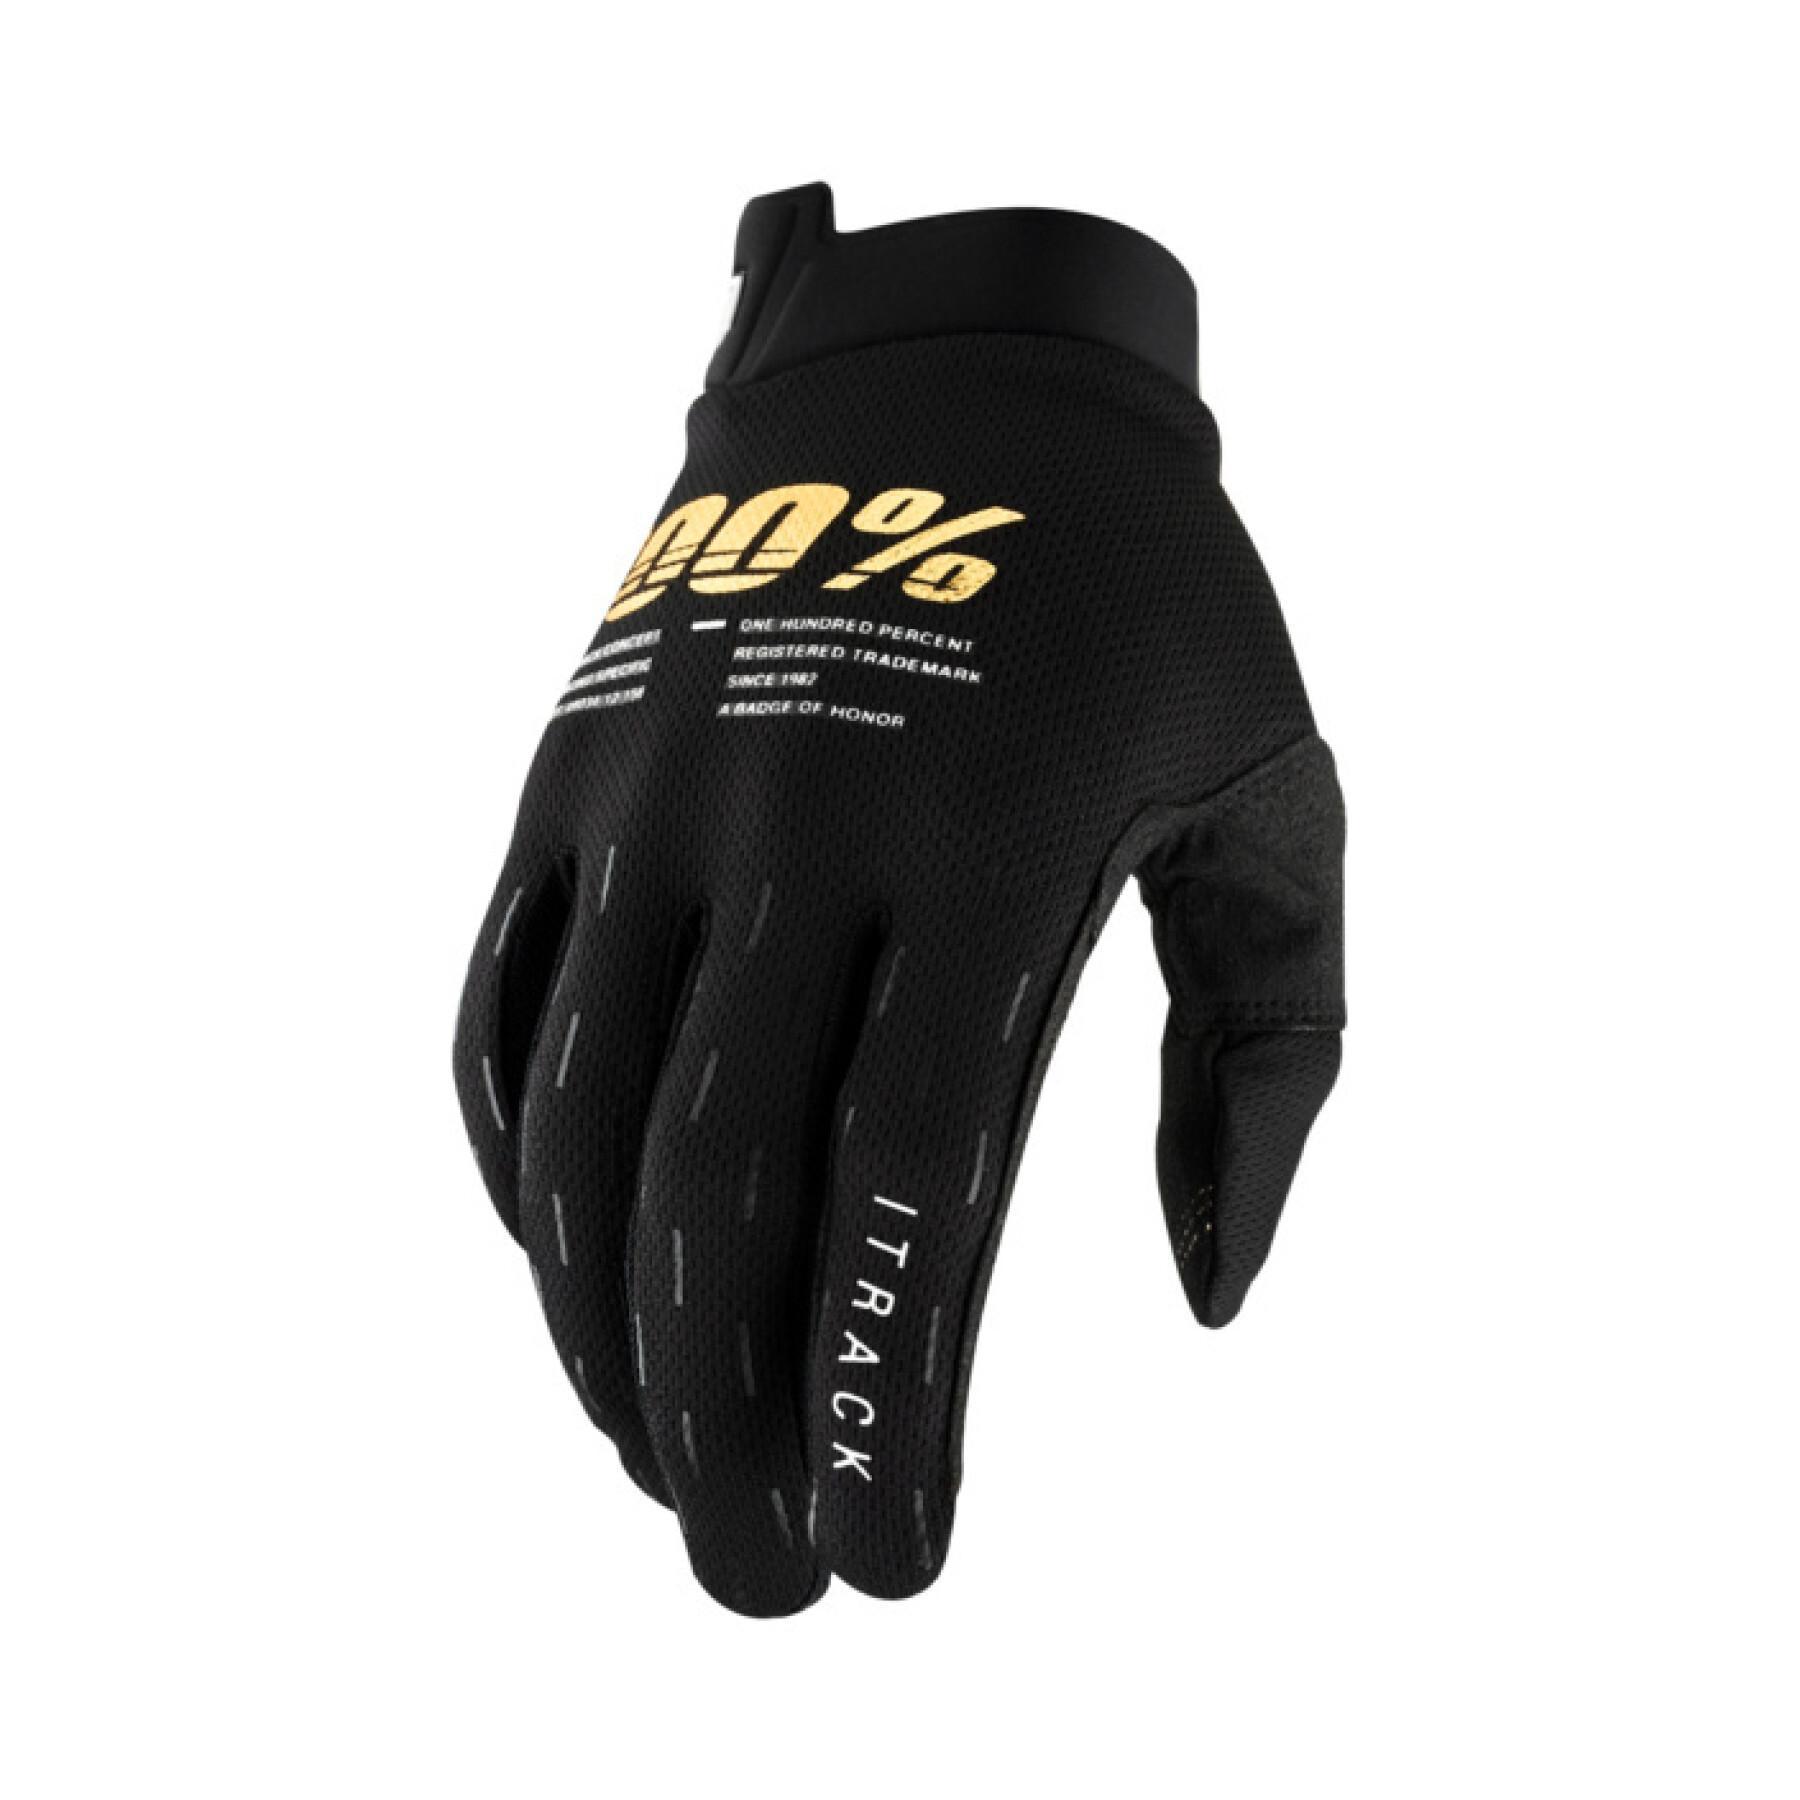 100% motorcycle cross gloves Itrack